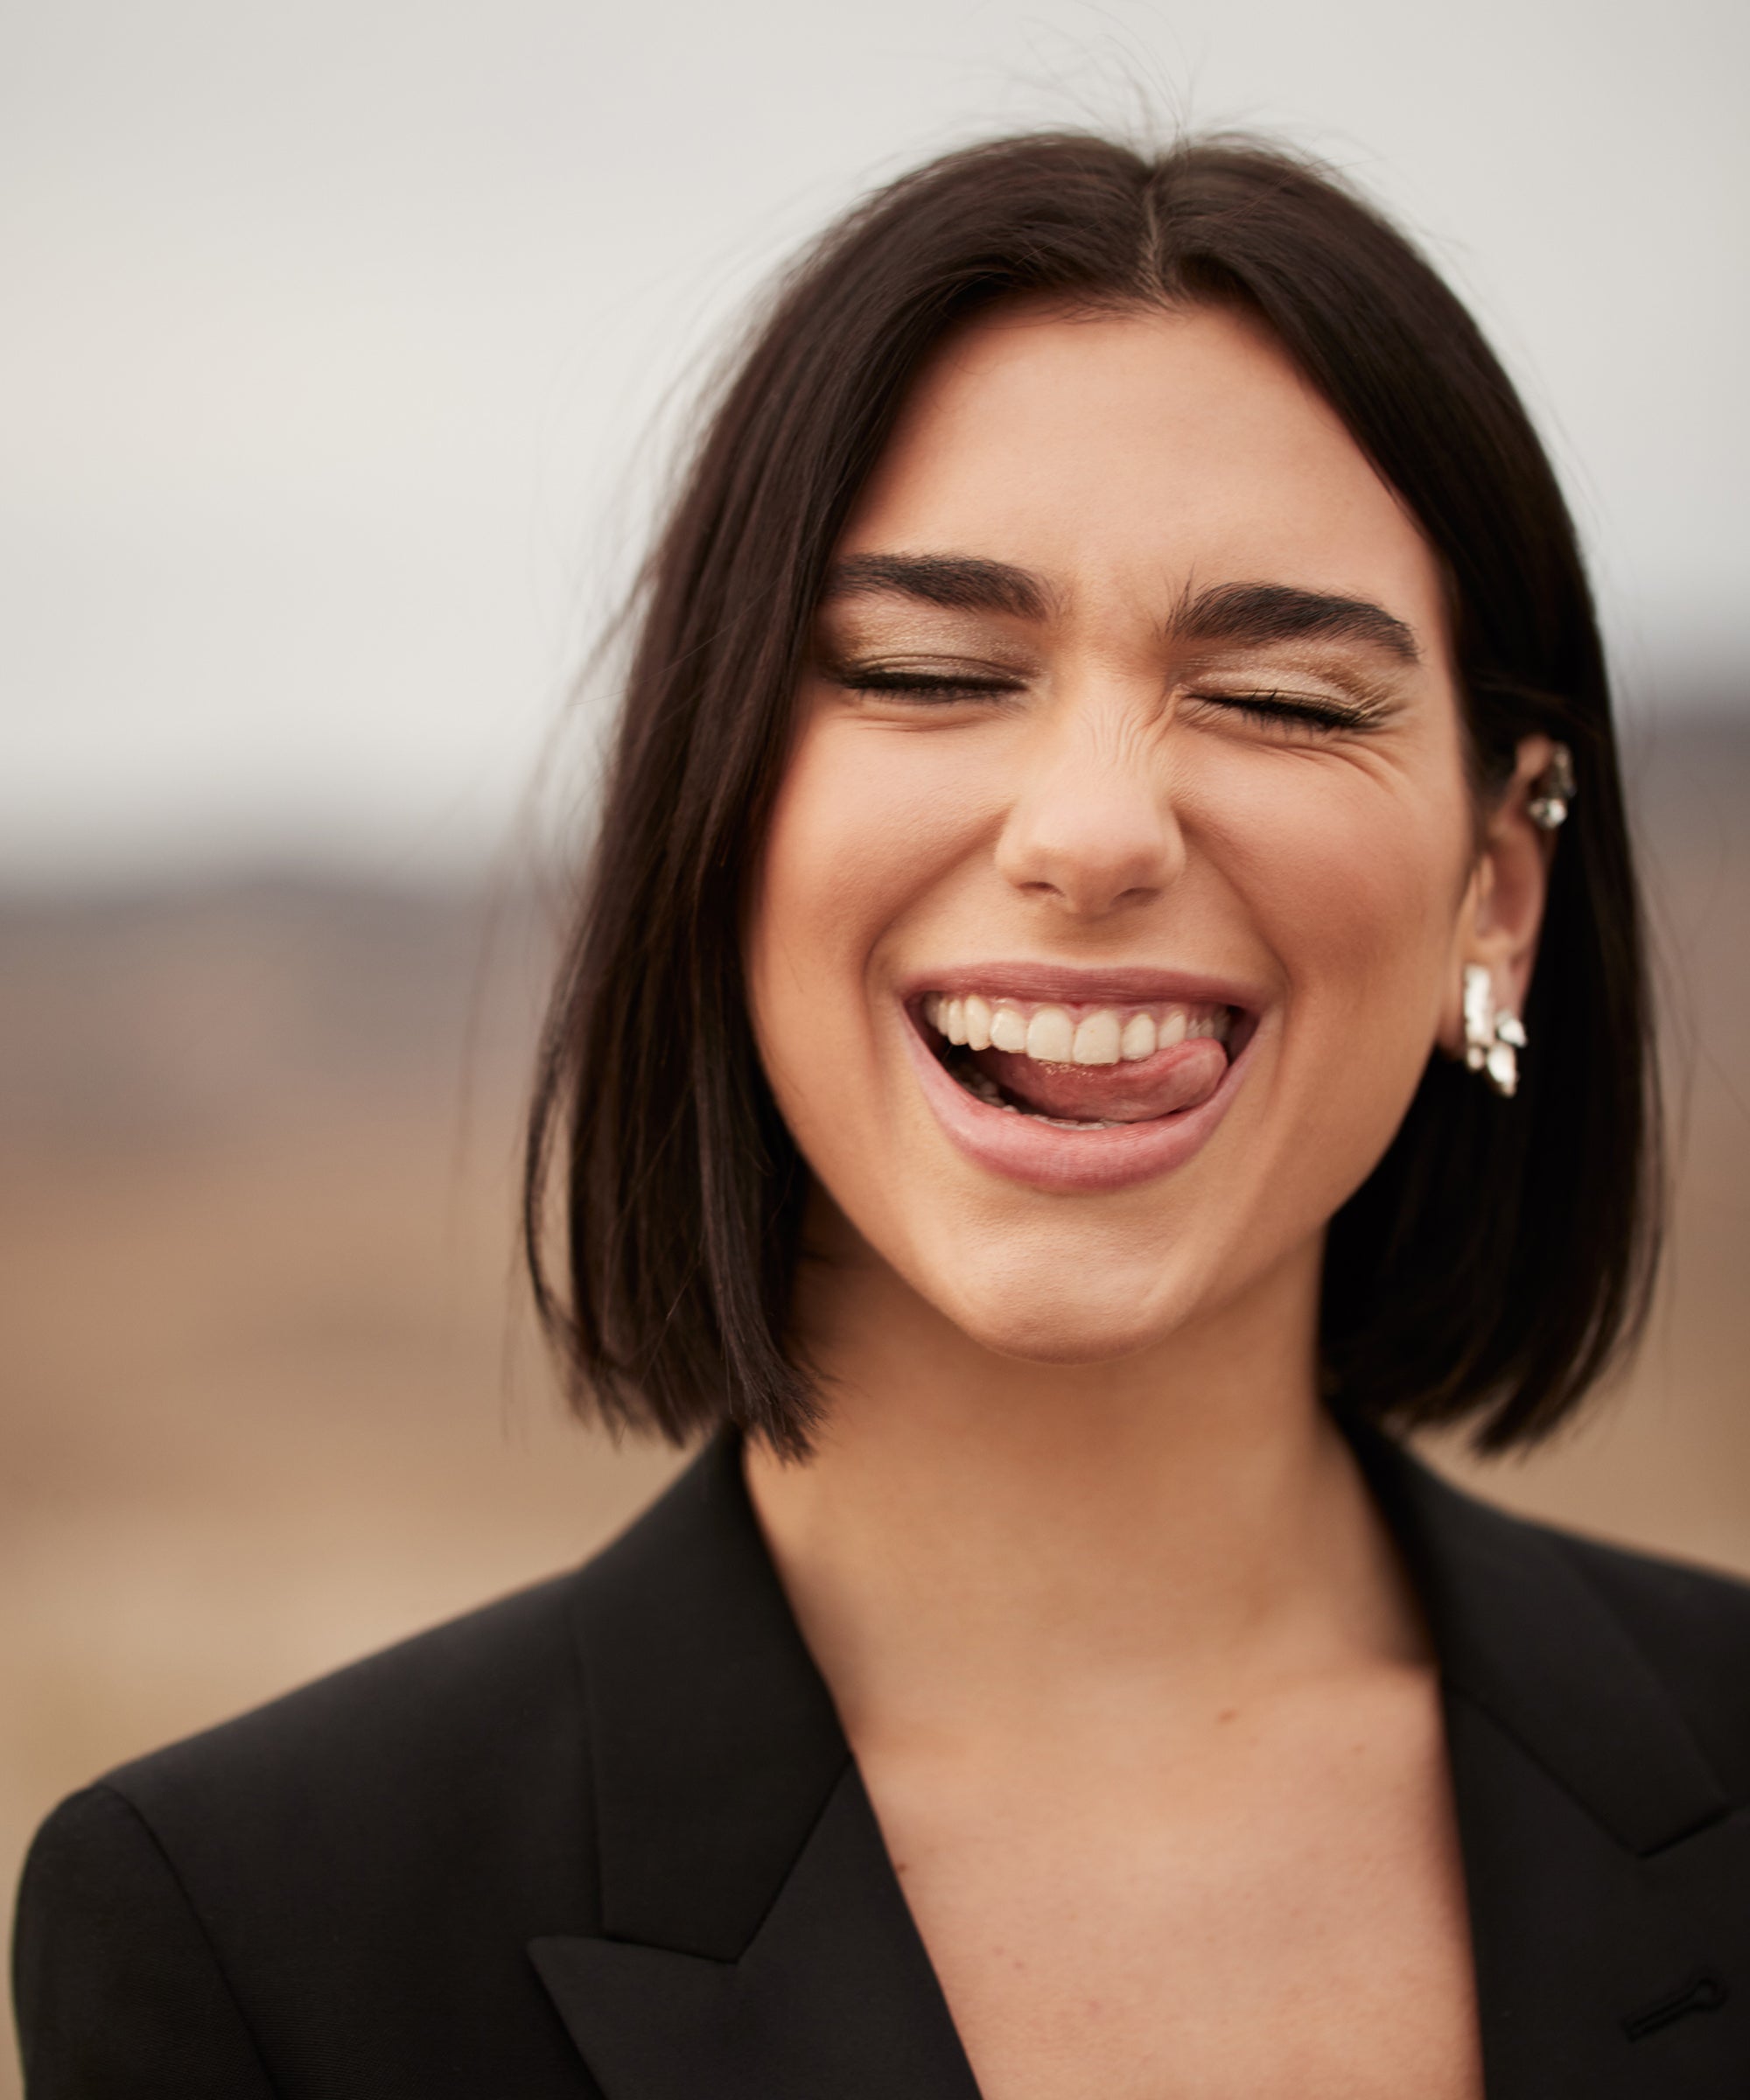 Dua Lipa on Her Yves Saint Laurent Beauty Libre Campaign and